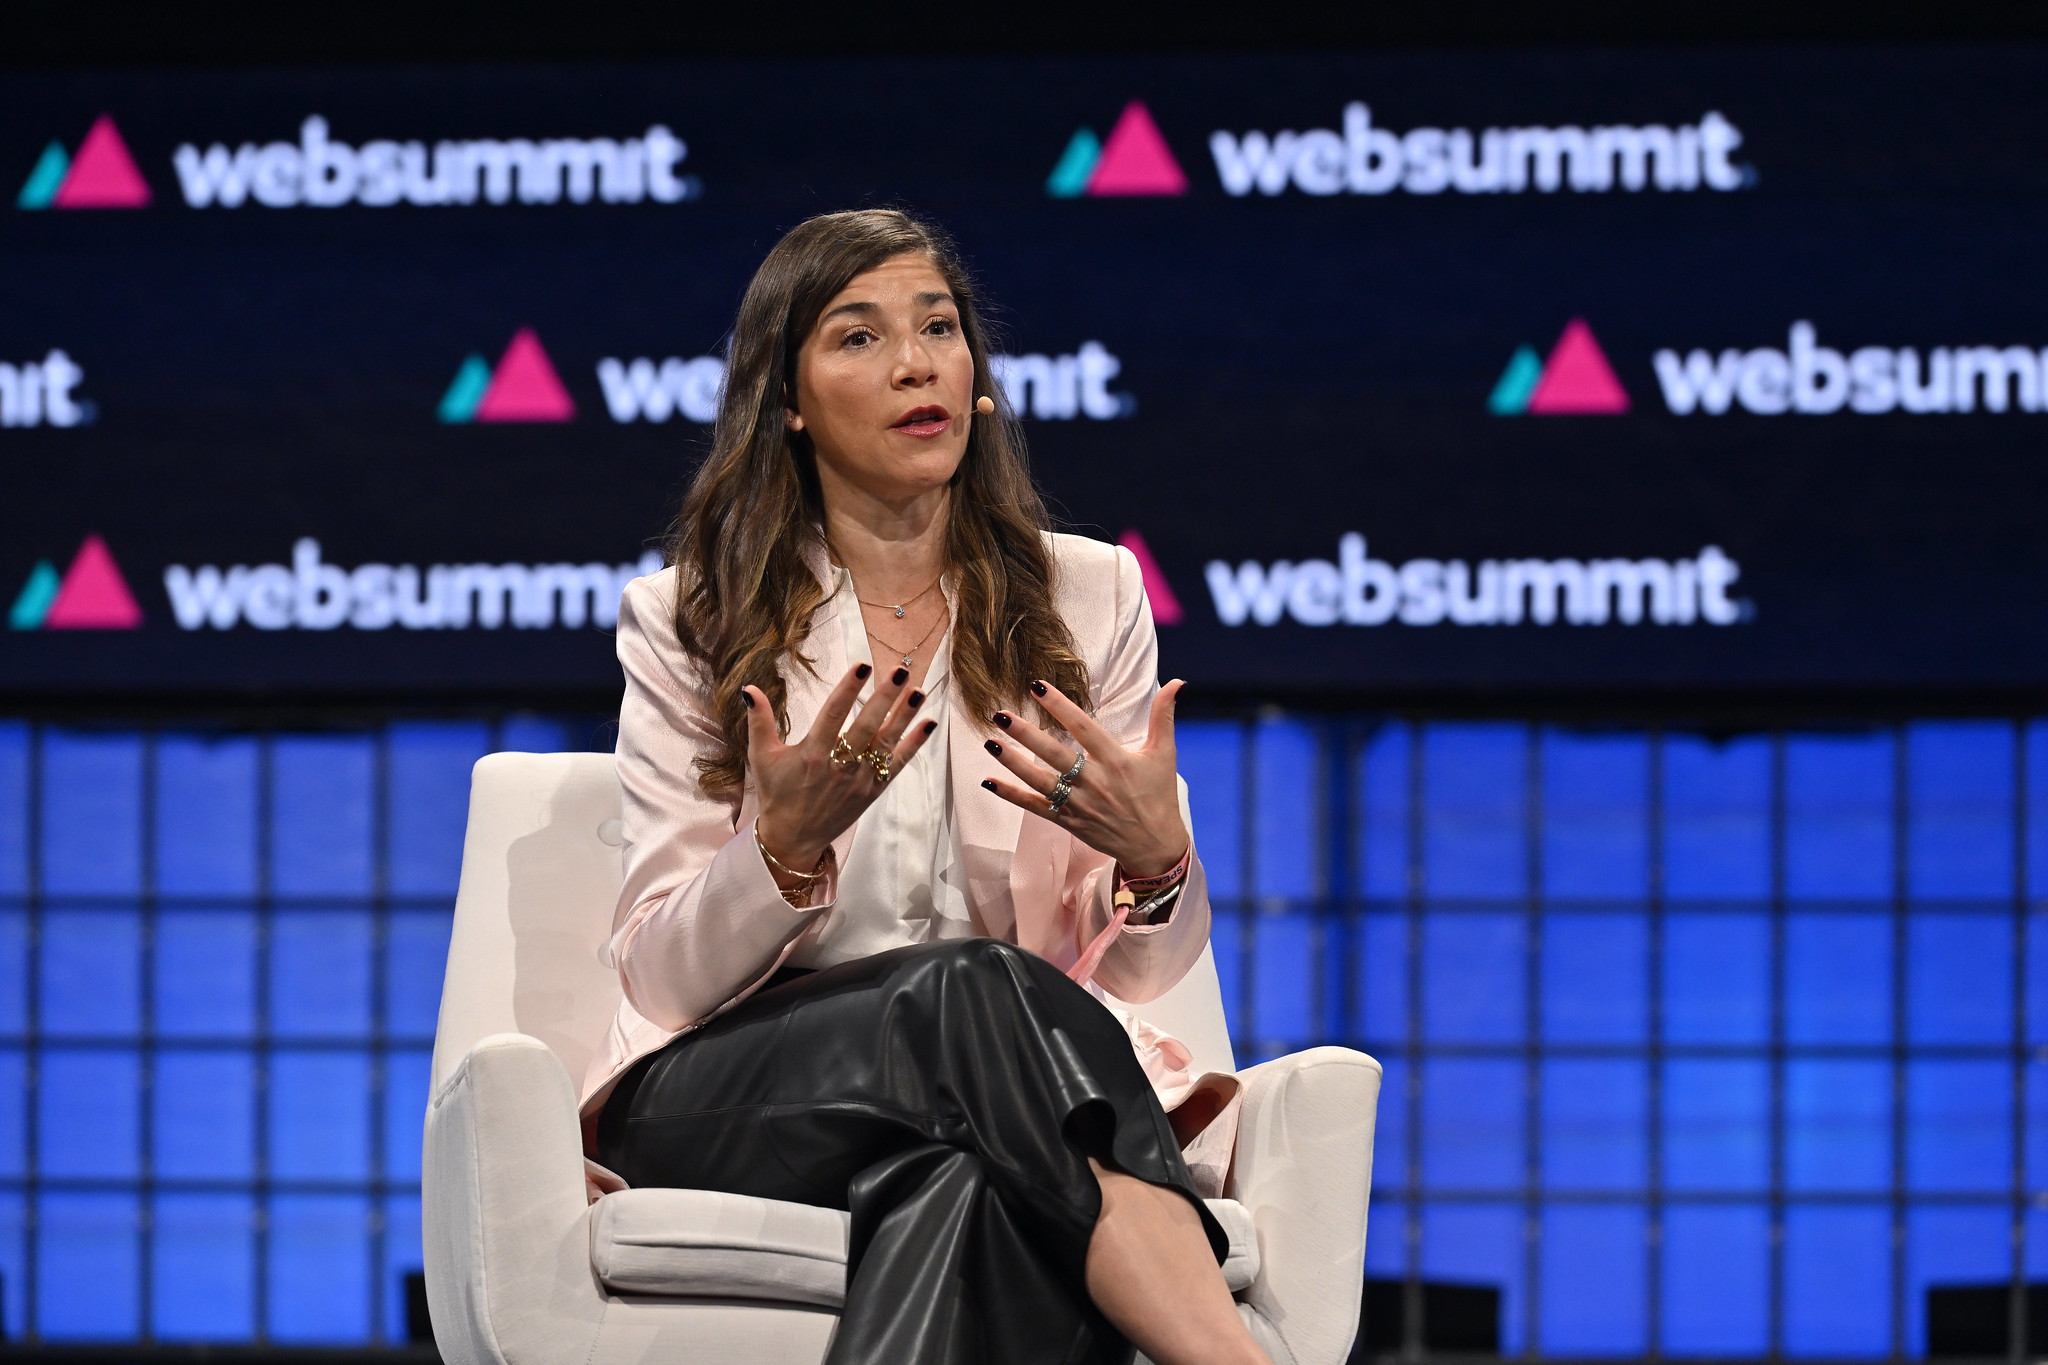 Mary Carmen Gasco-Buisson, Chief Marketing Officer, Pandora, on Centre stage during day two of Web Summit 2023 at the Altice Arena in Lisbon, Portugal